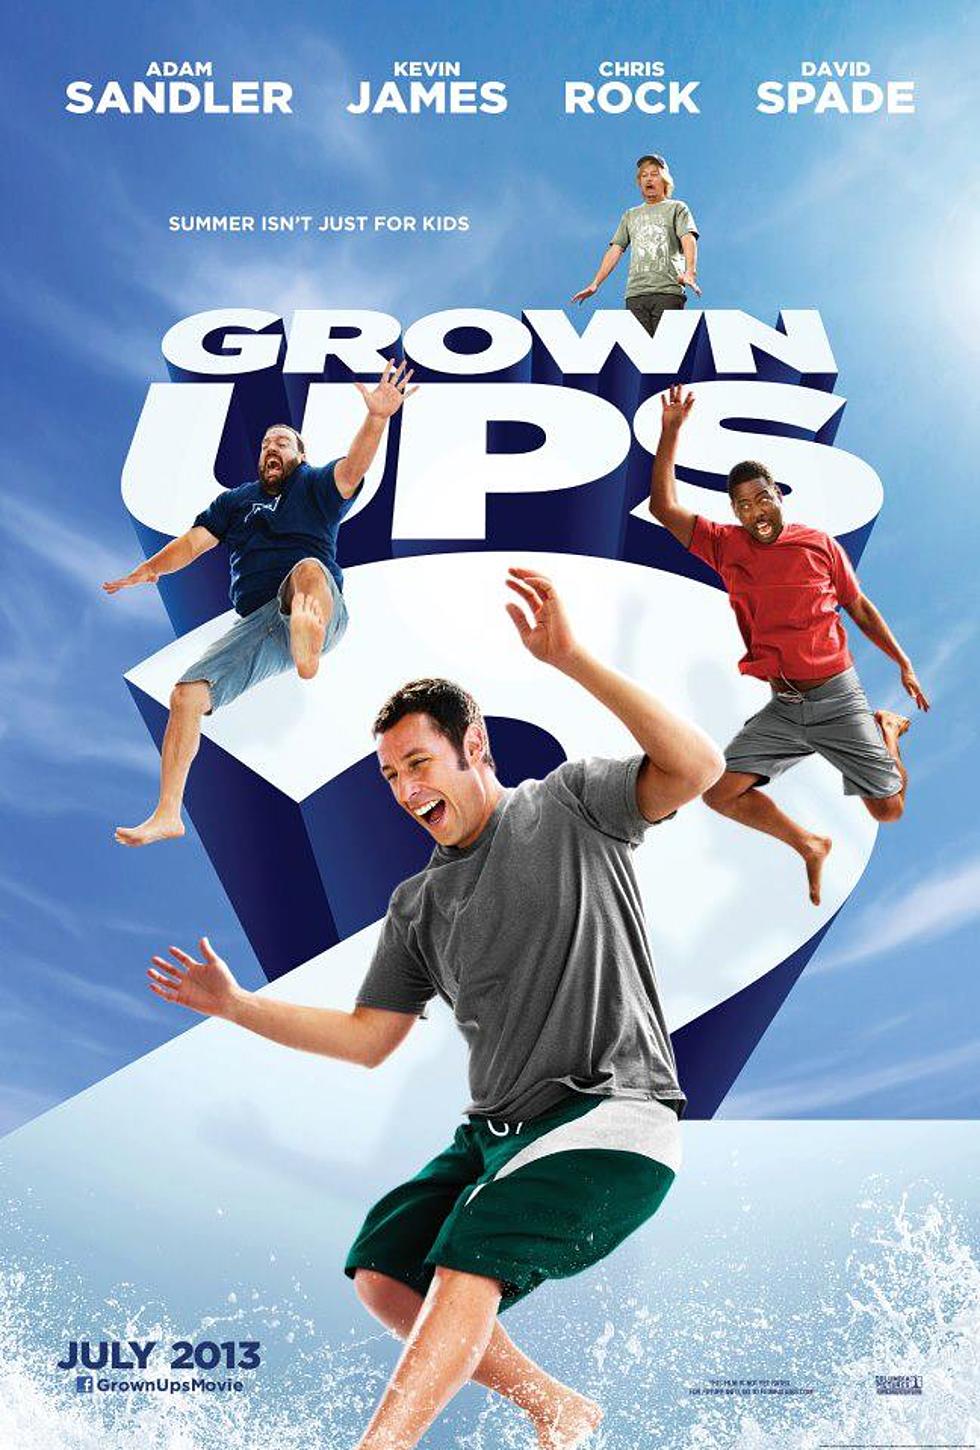 Adam Sandler is Back with “Grown Ups 2″- Here’s What Our Movie Critic Thinks